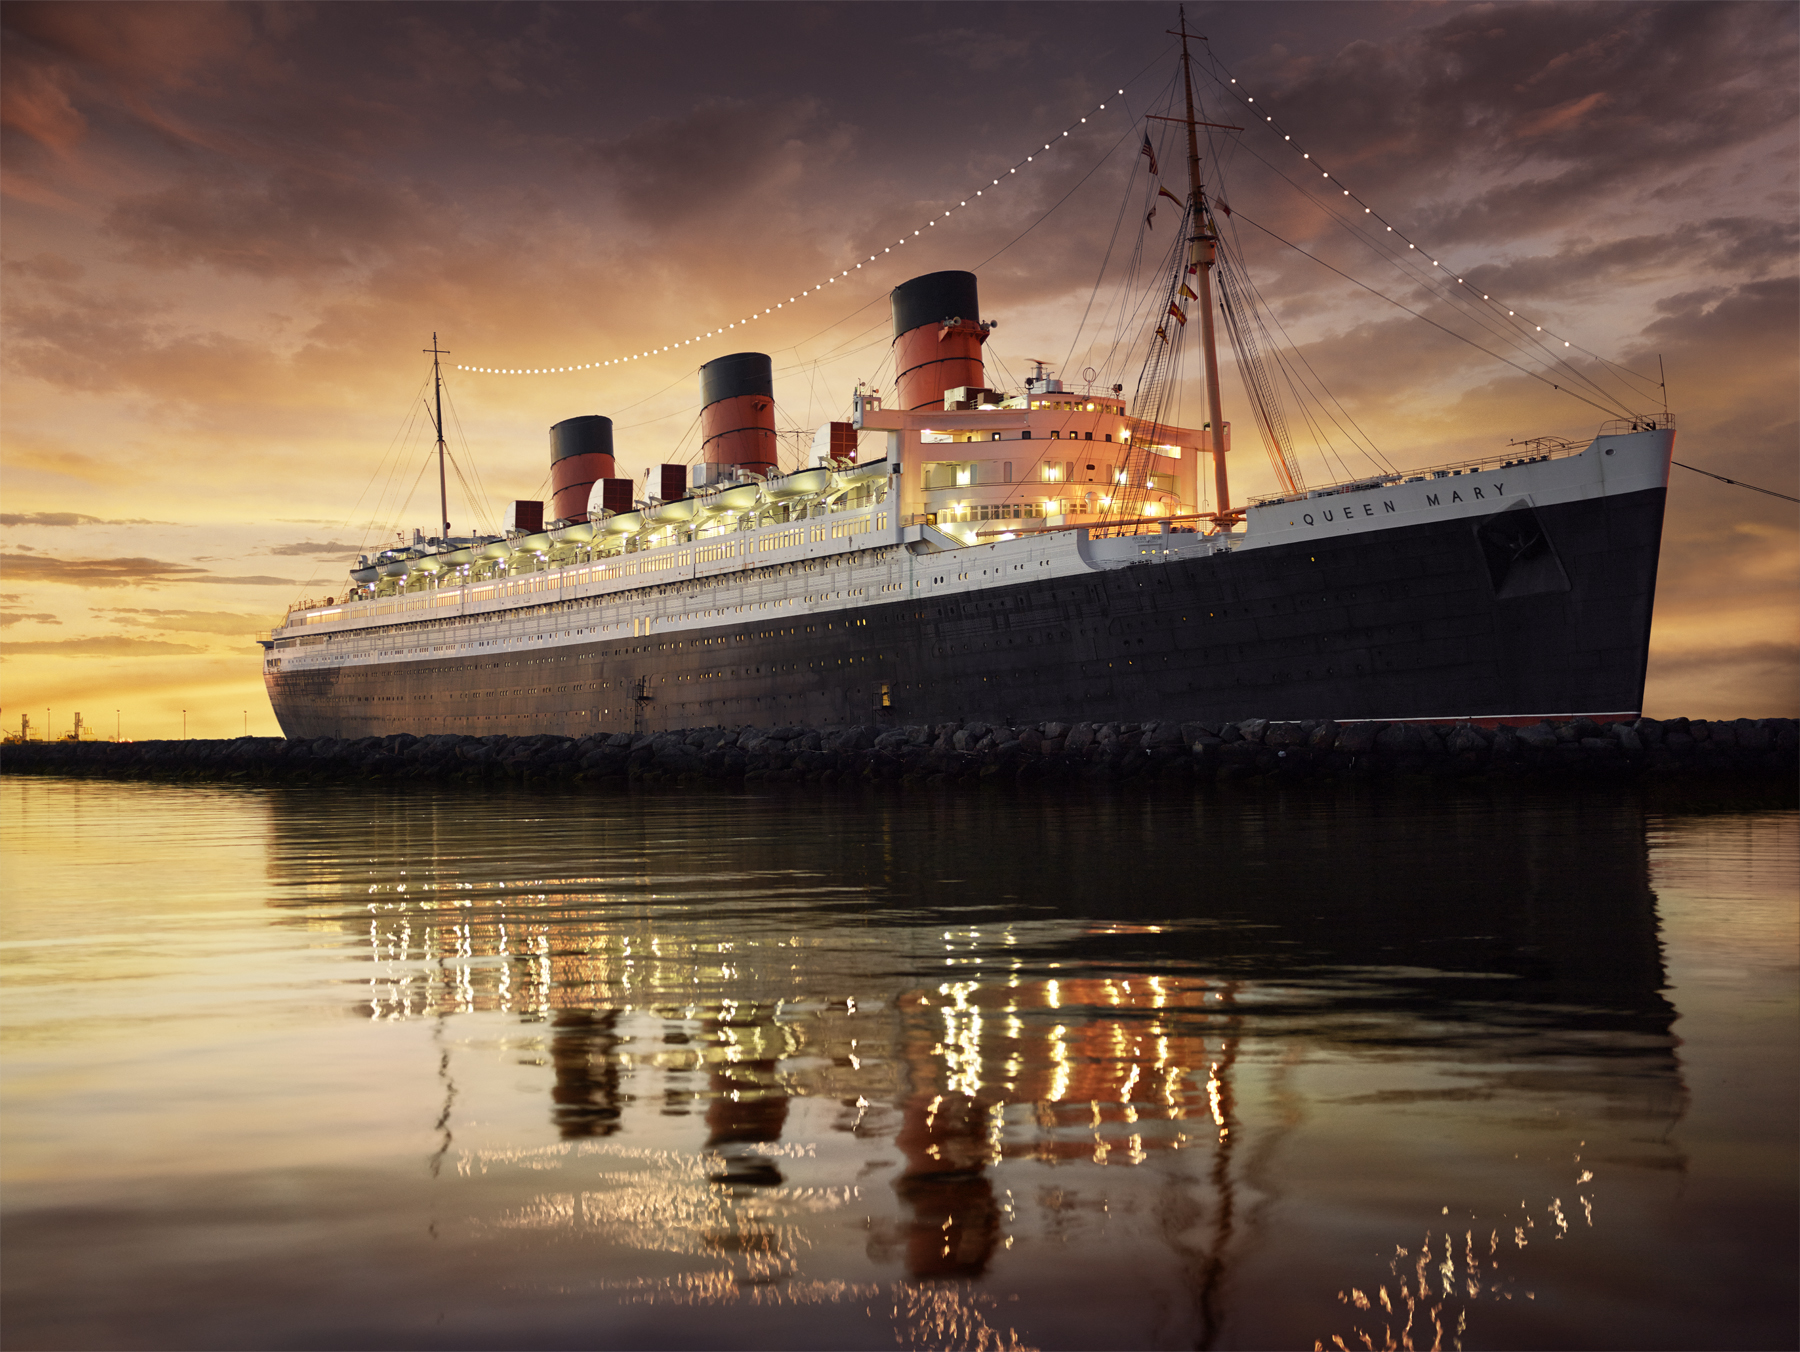 Queen Mary at dusk.